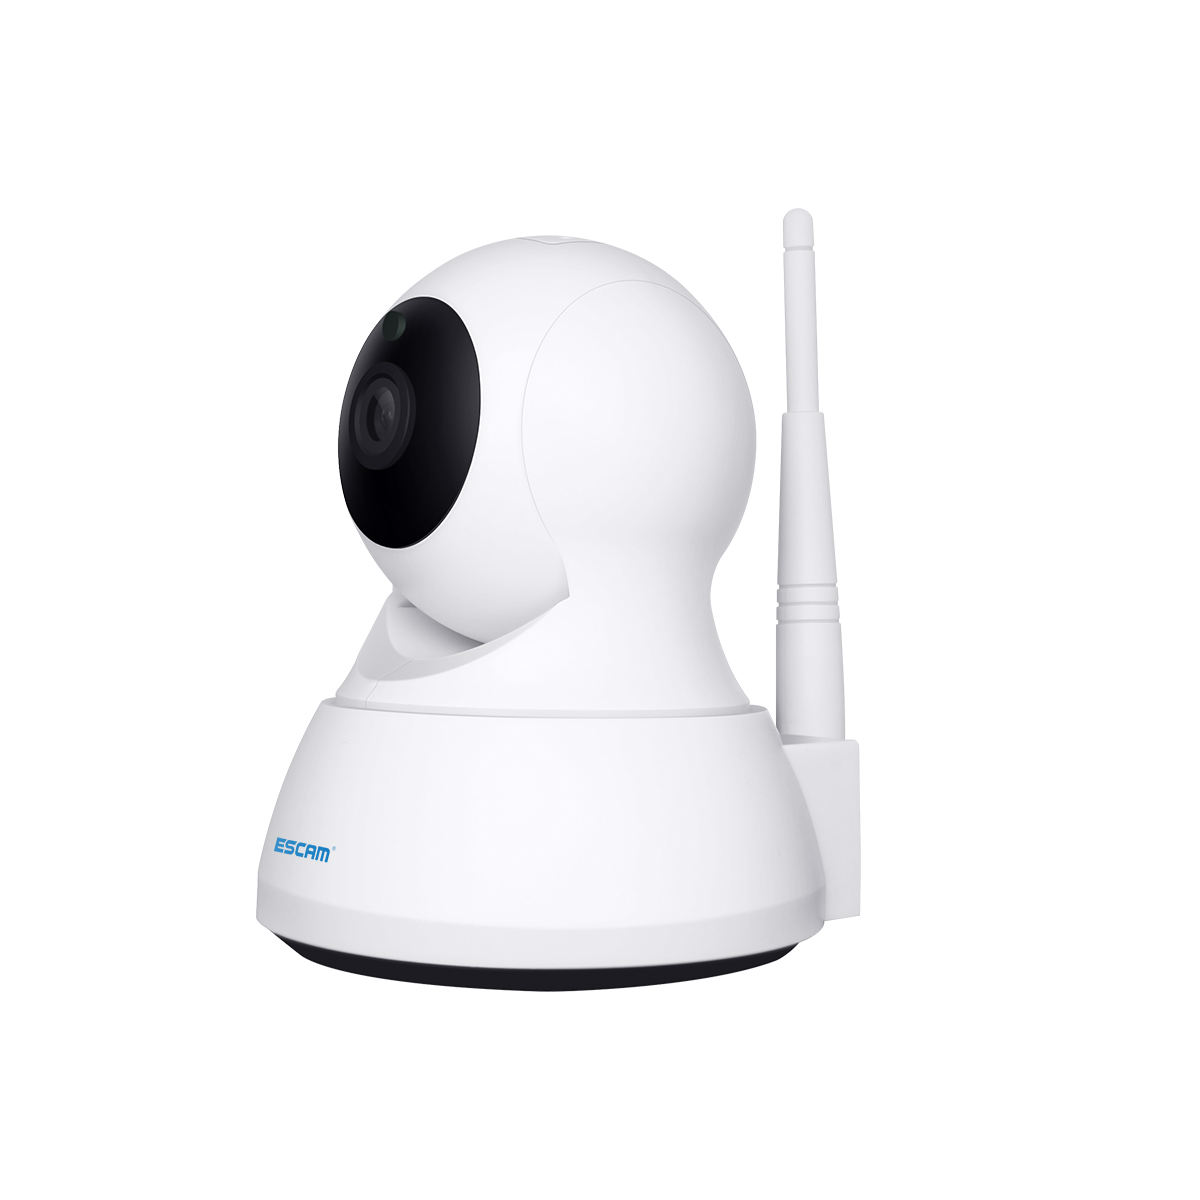 ESCAM QF007 720P 1MP WiFi IP Camera Night Vision Pan Tilt Support Motion Detection 64G TF Card 19